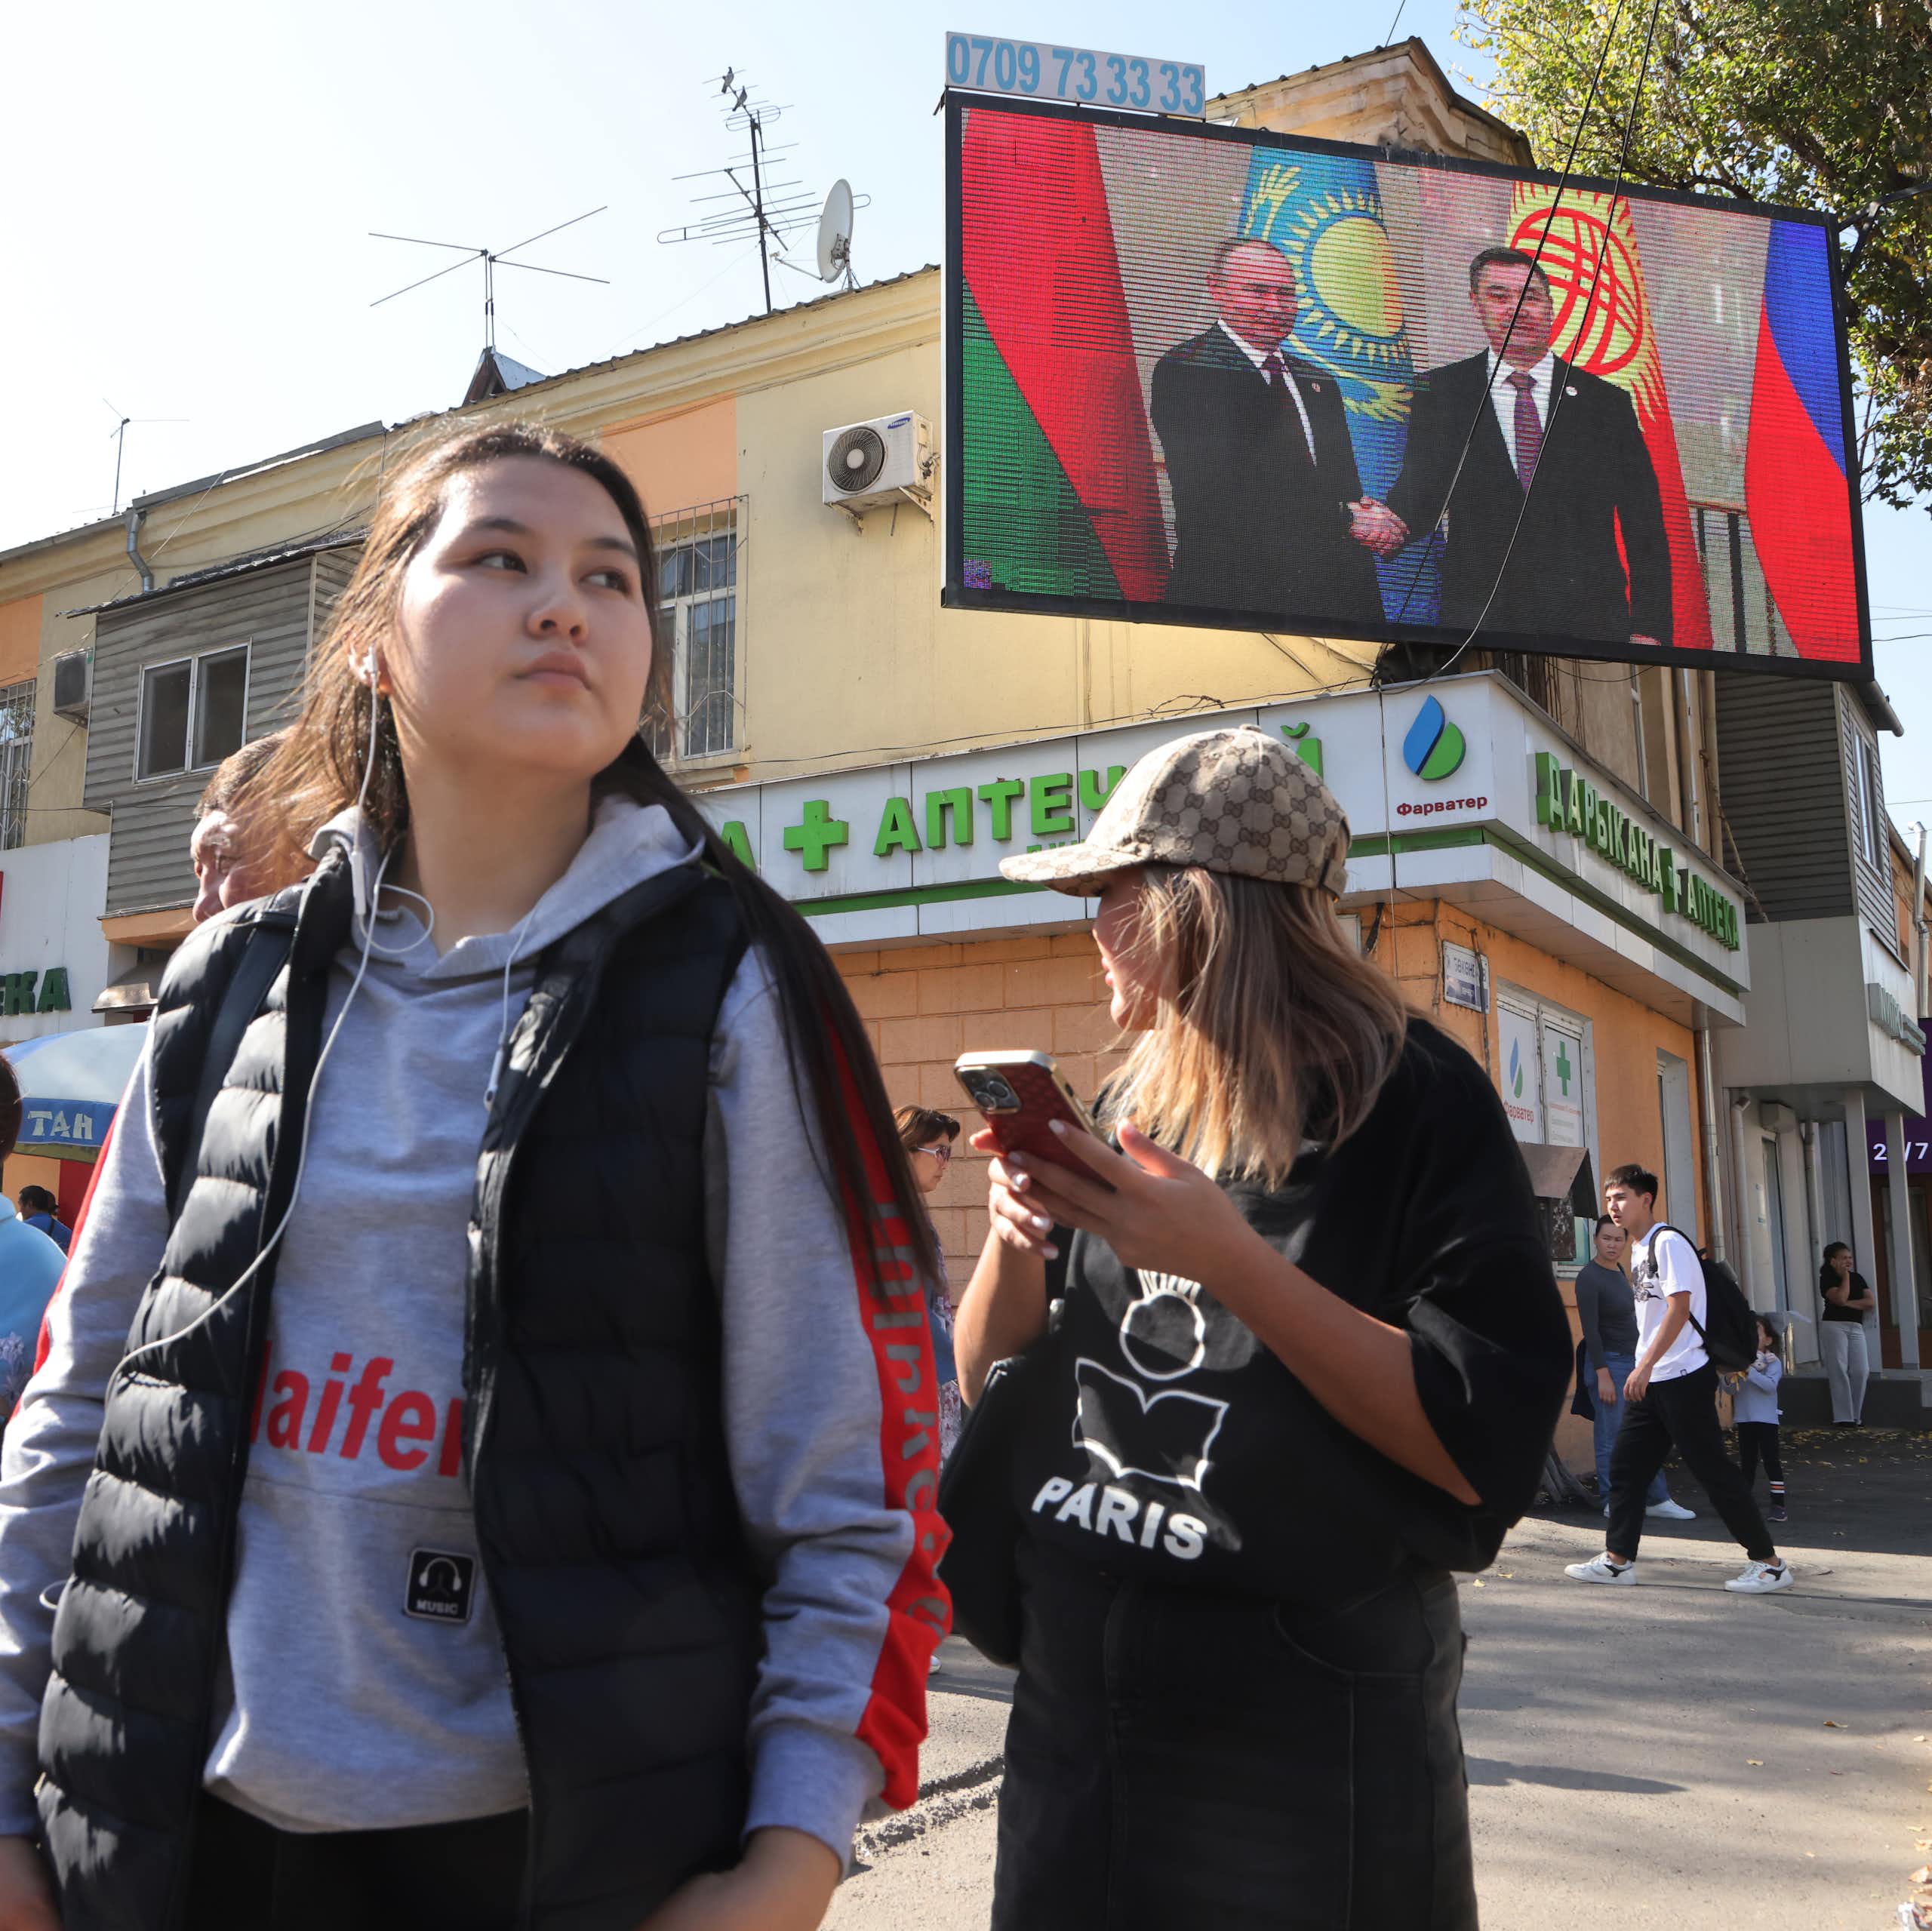 Women stand in a group in front of shops and a big TV screen showing two men.